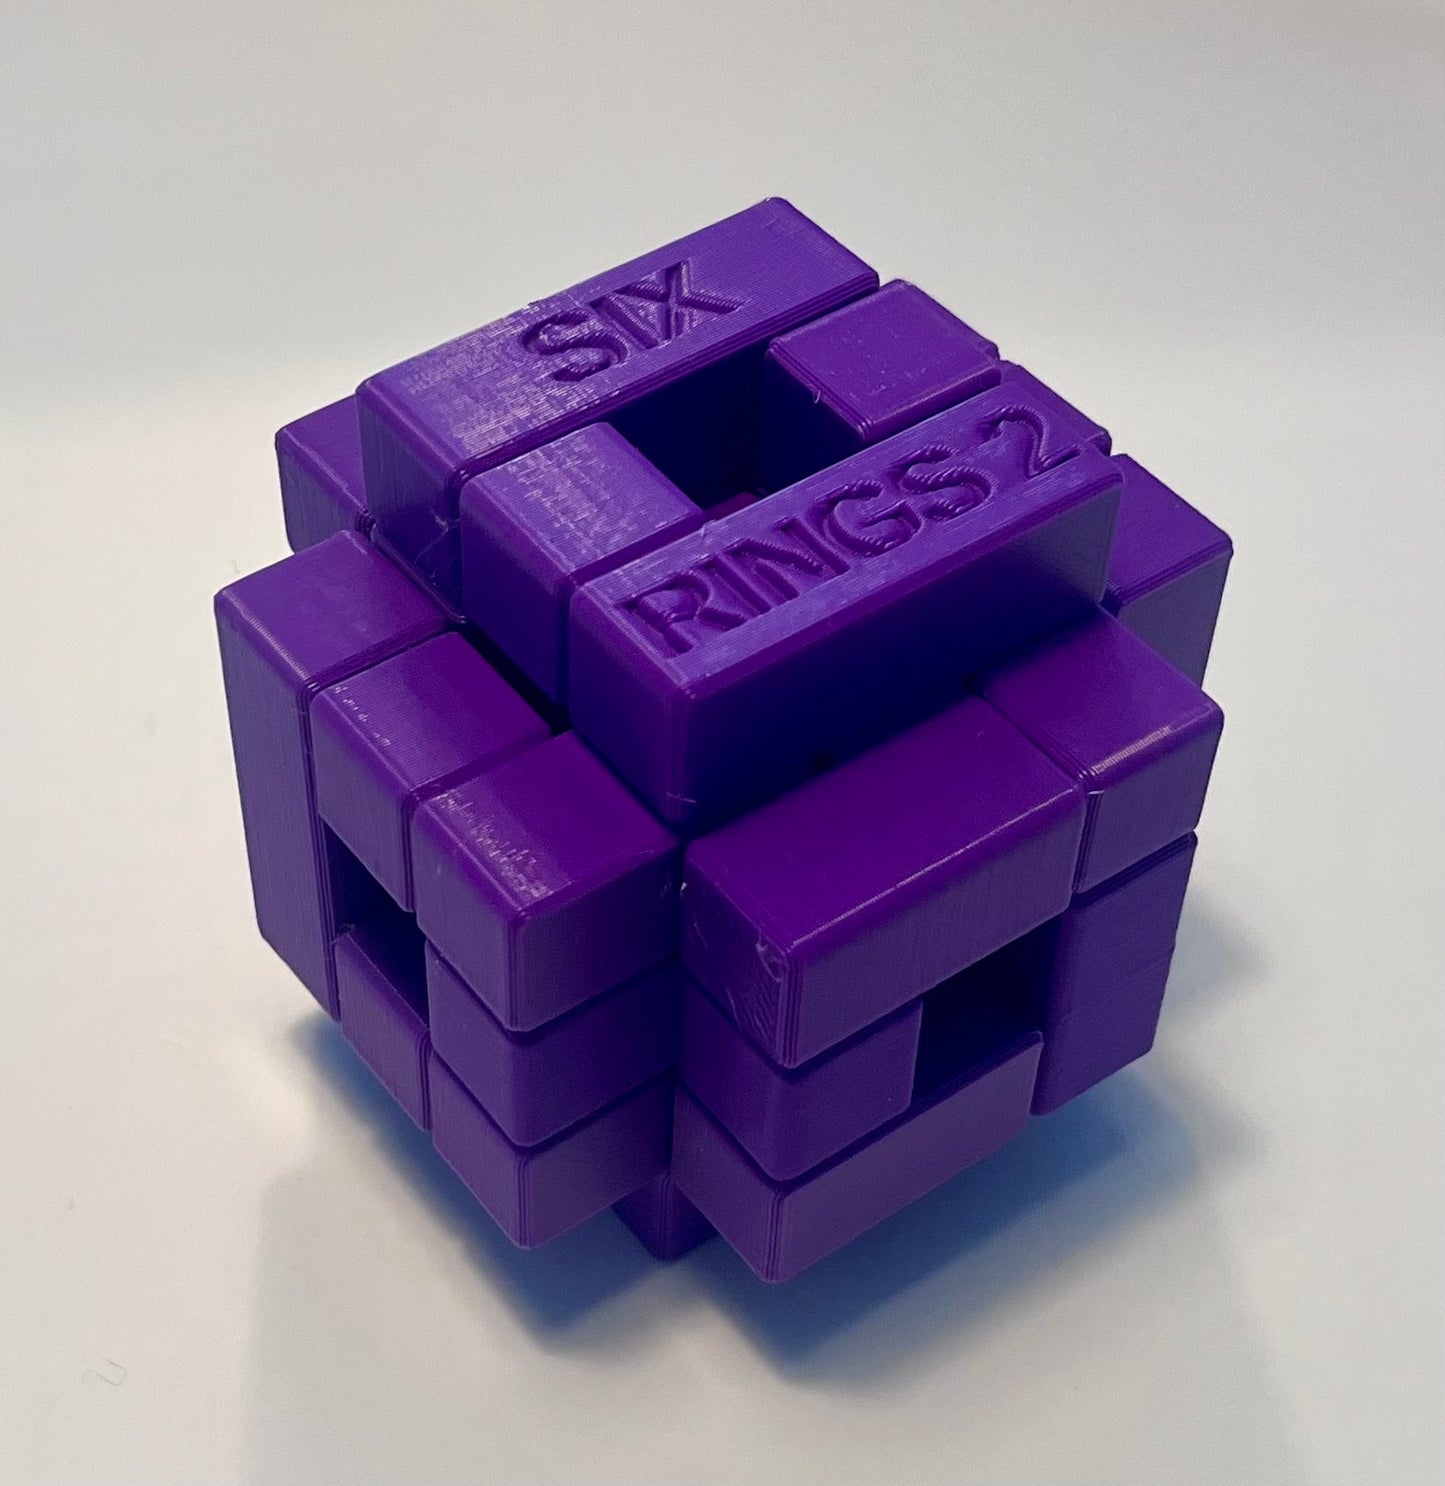 Download Volume 2 of 3D Printable STL Files for 6 5x5x5 Turning Interlocking Cube Puzzles